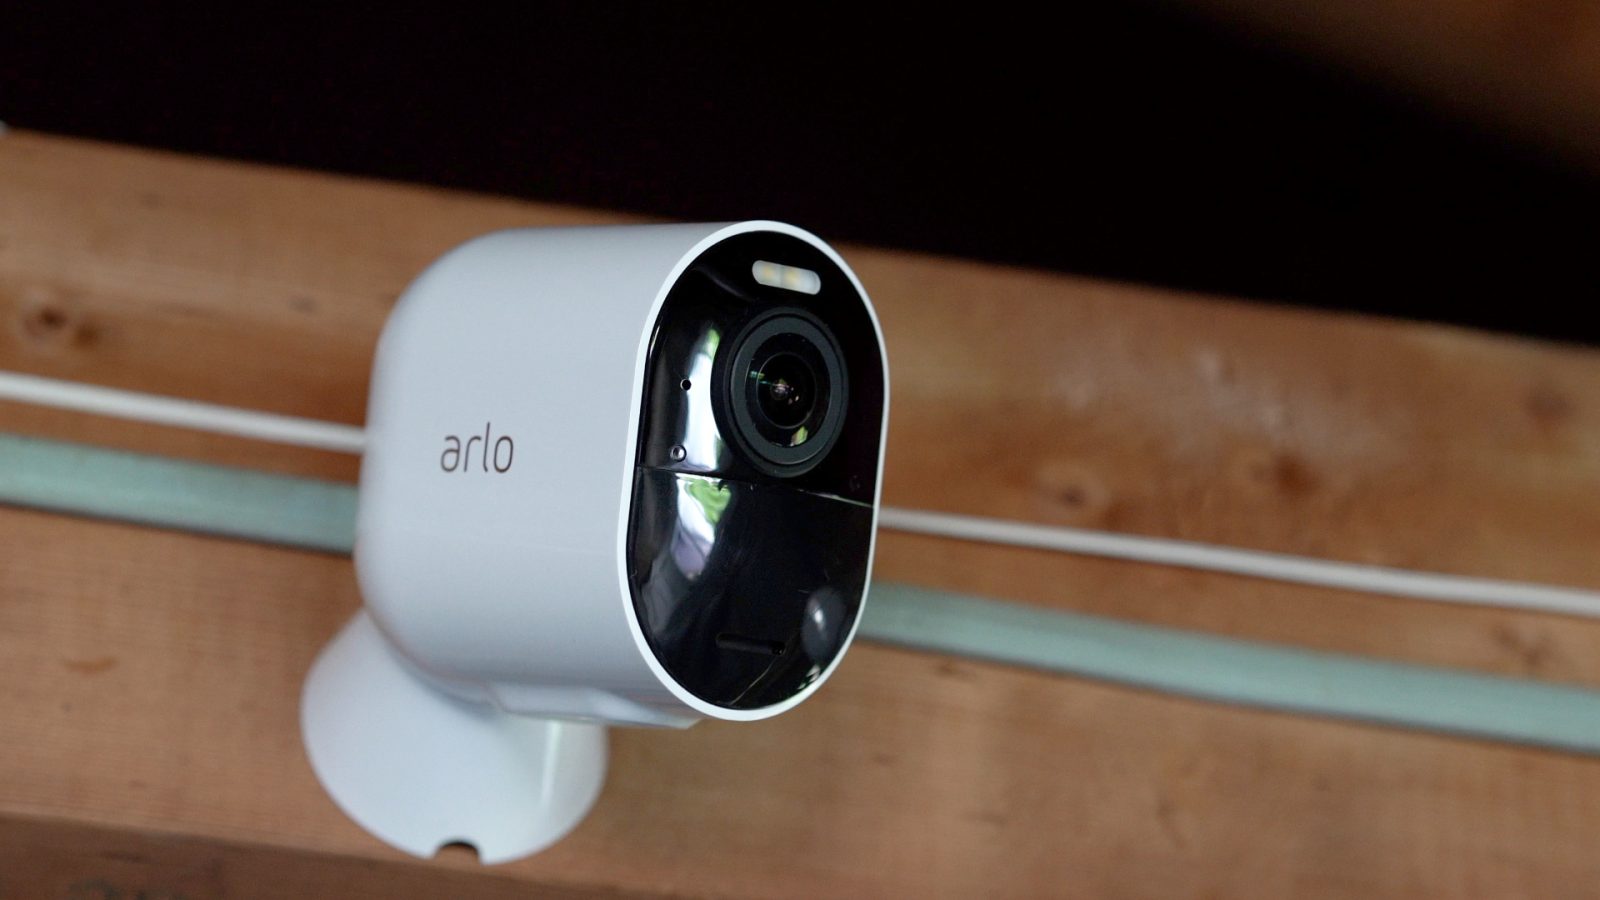 ophøre faglært Hub Arlo Ultra 4K is a more capable wireless security camera system - 9to5Mac